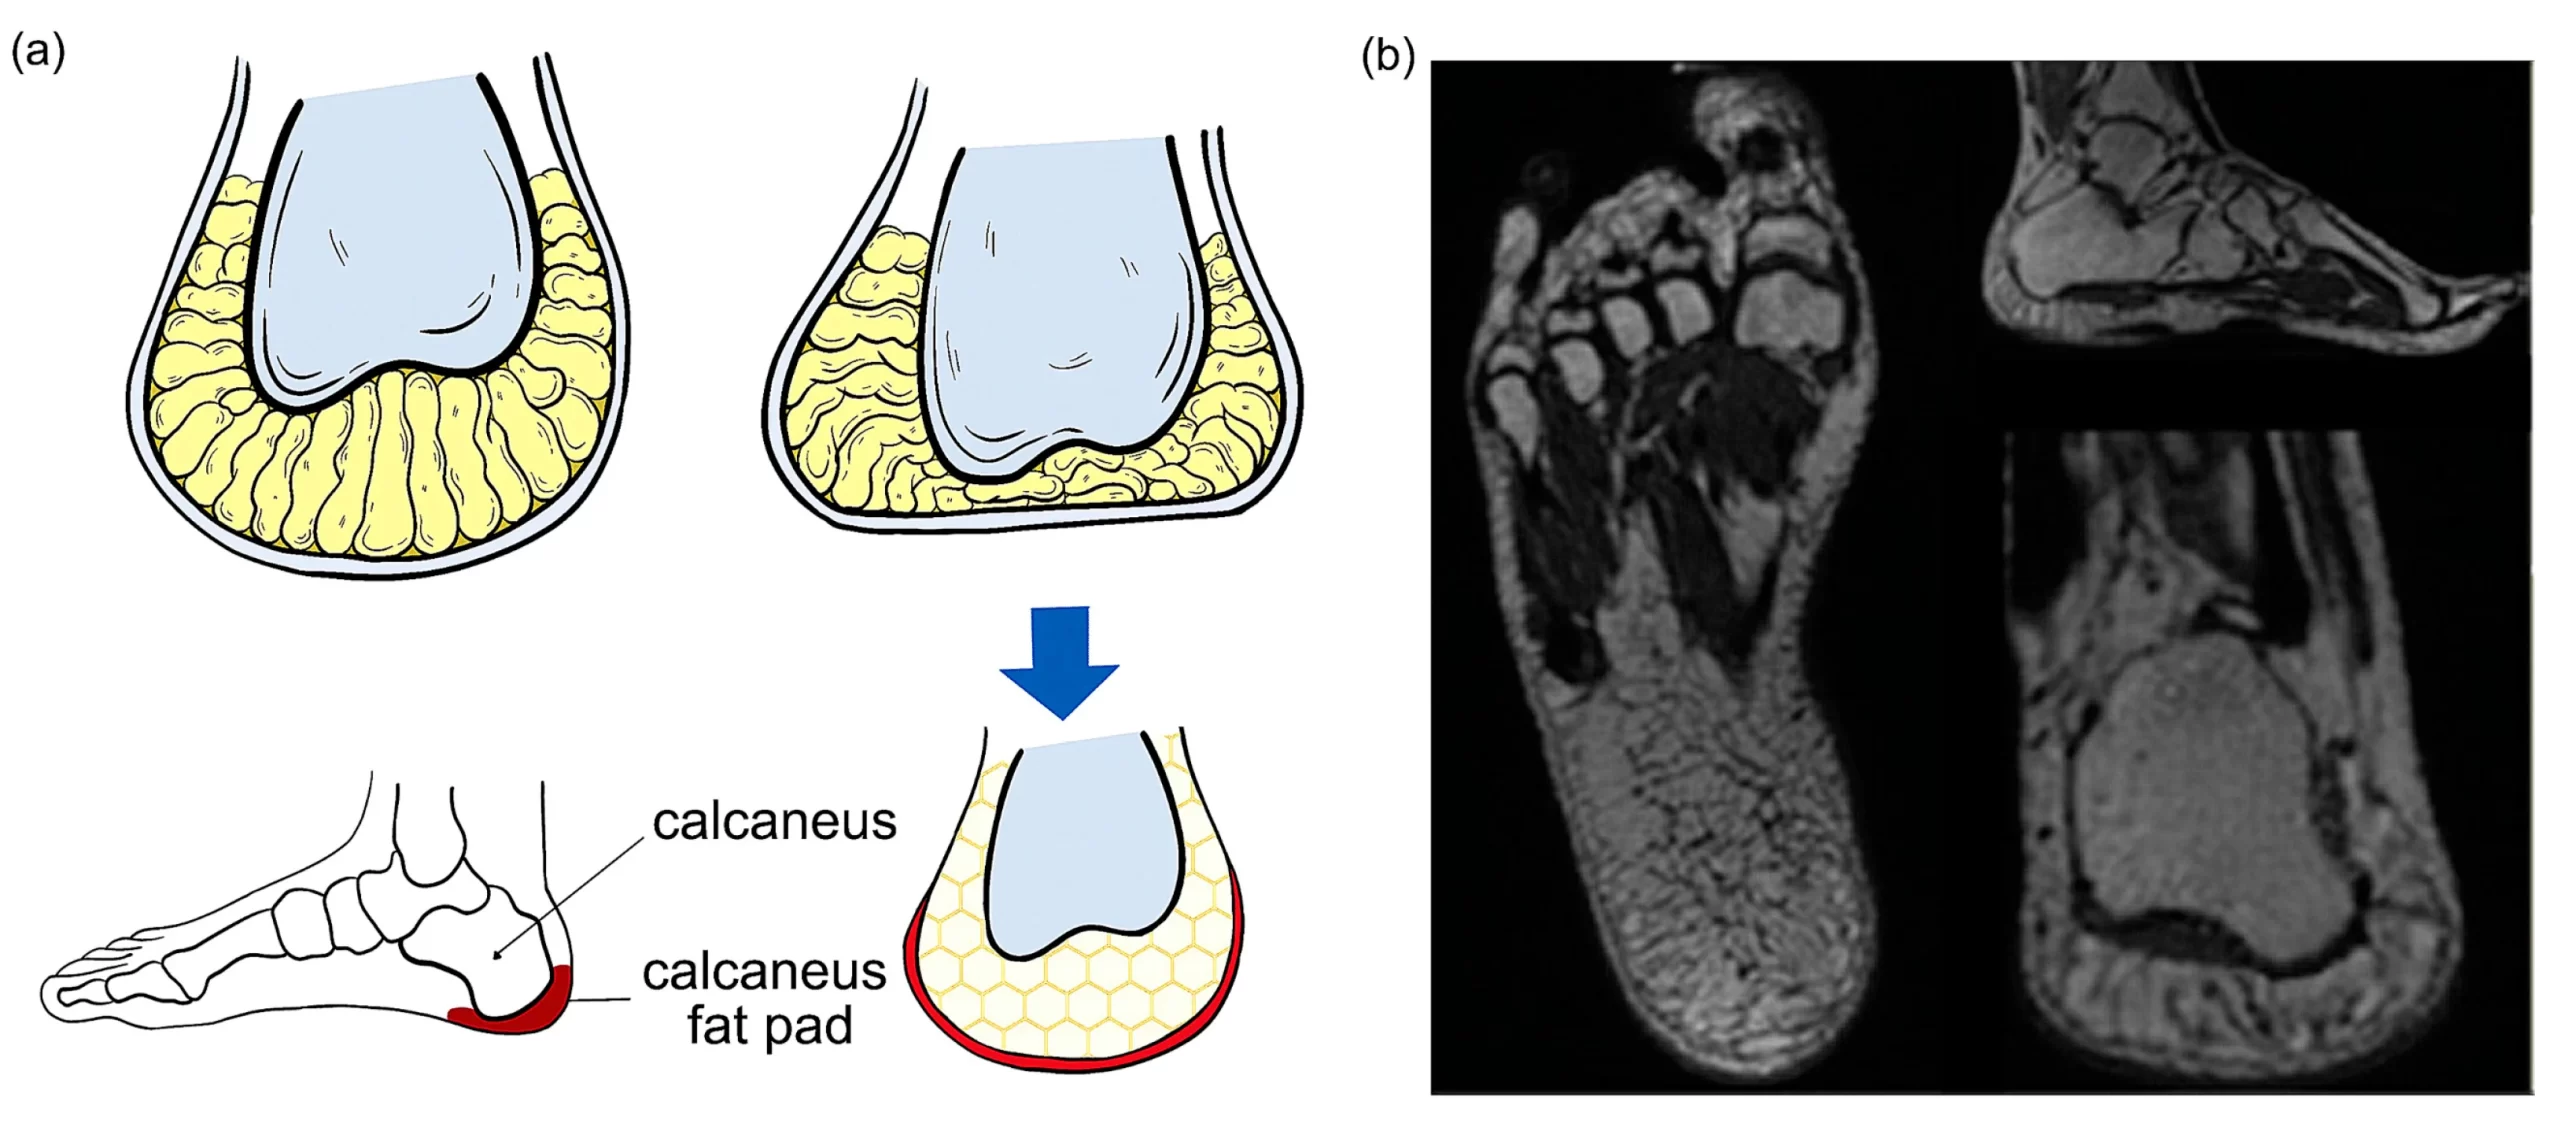 Heel Fat Pad Syndrome